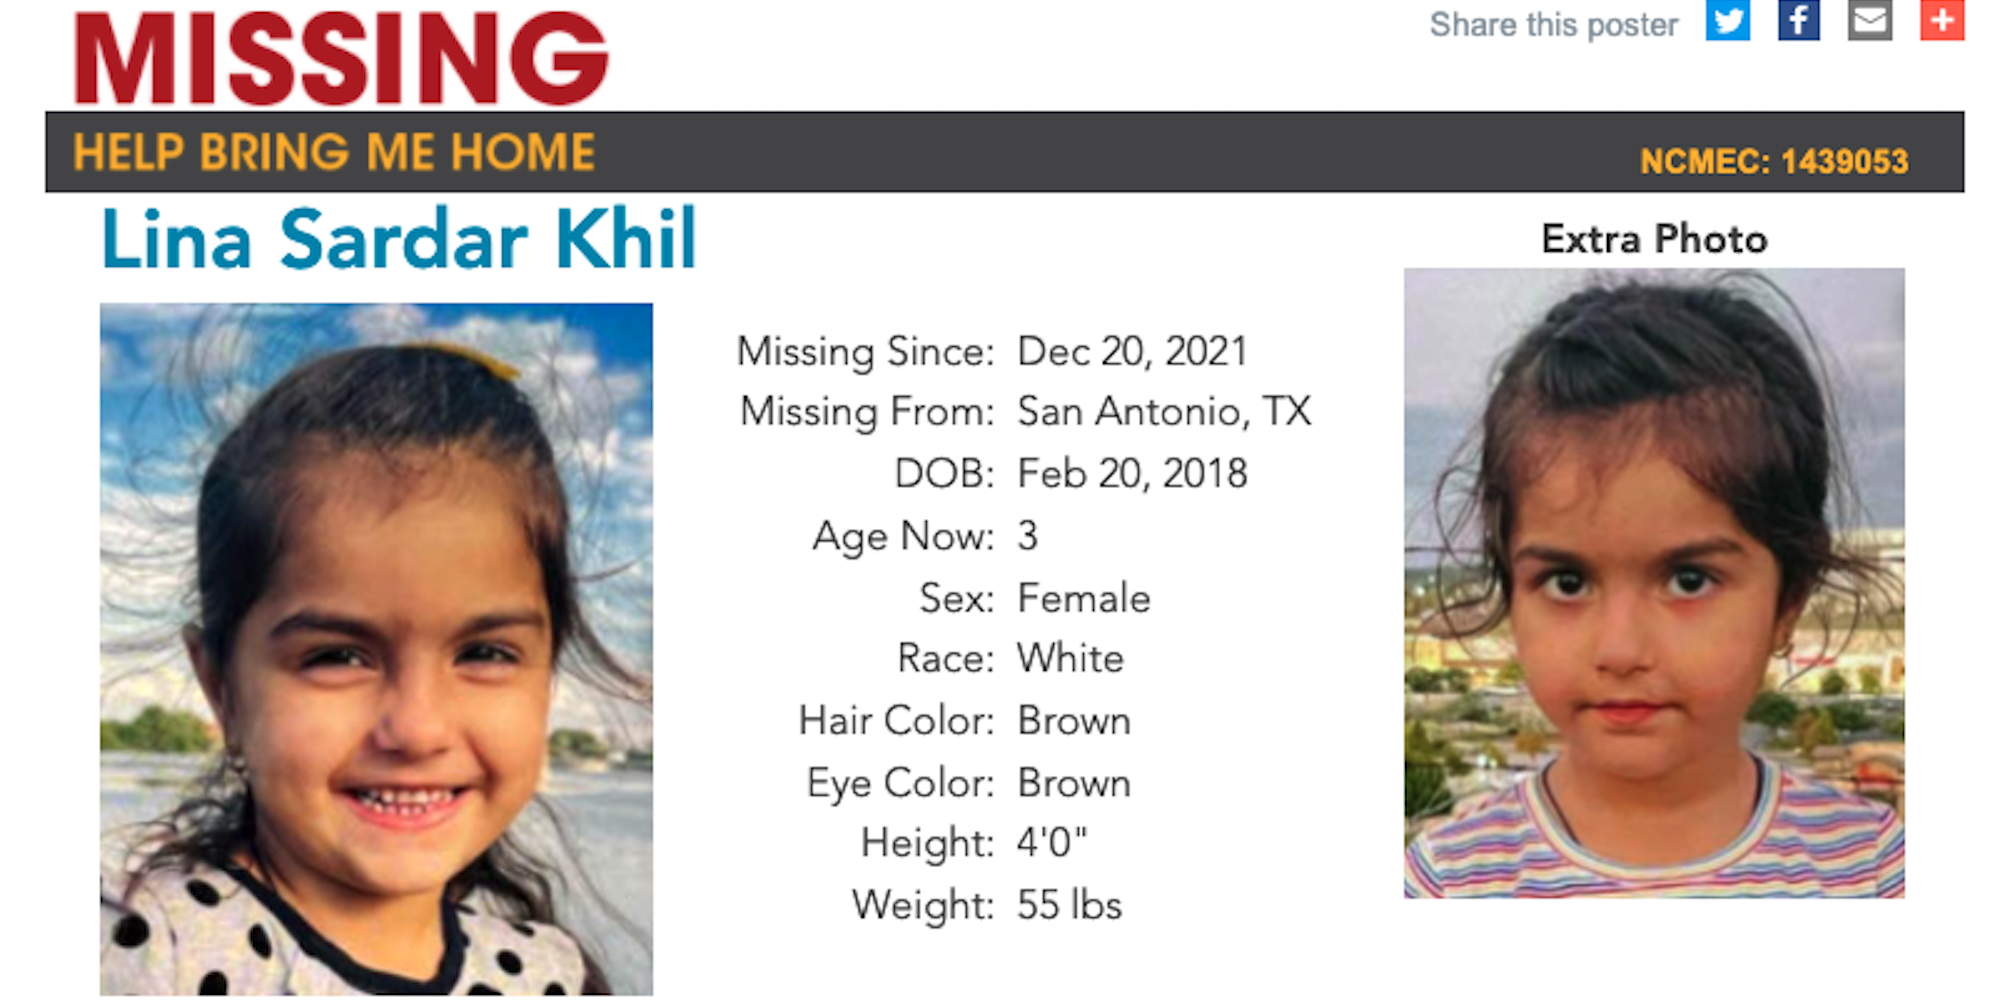 Reward increased to $170,000 for Afghan immigrant girl, 3, who